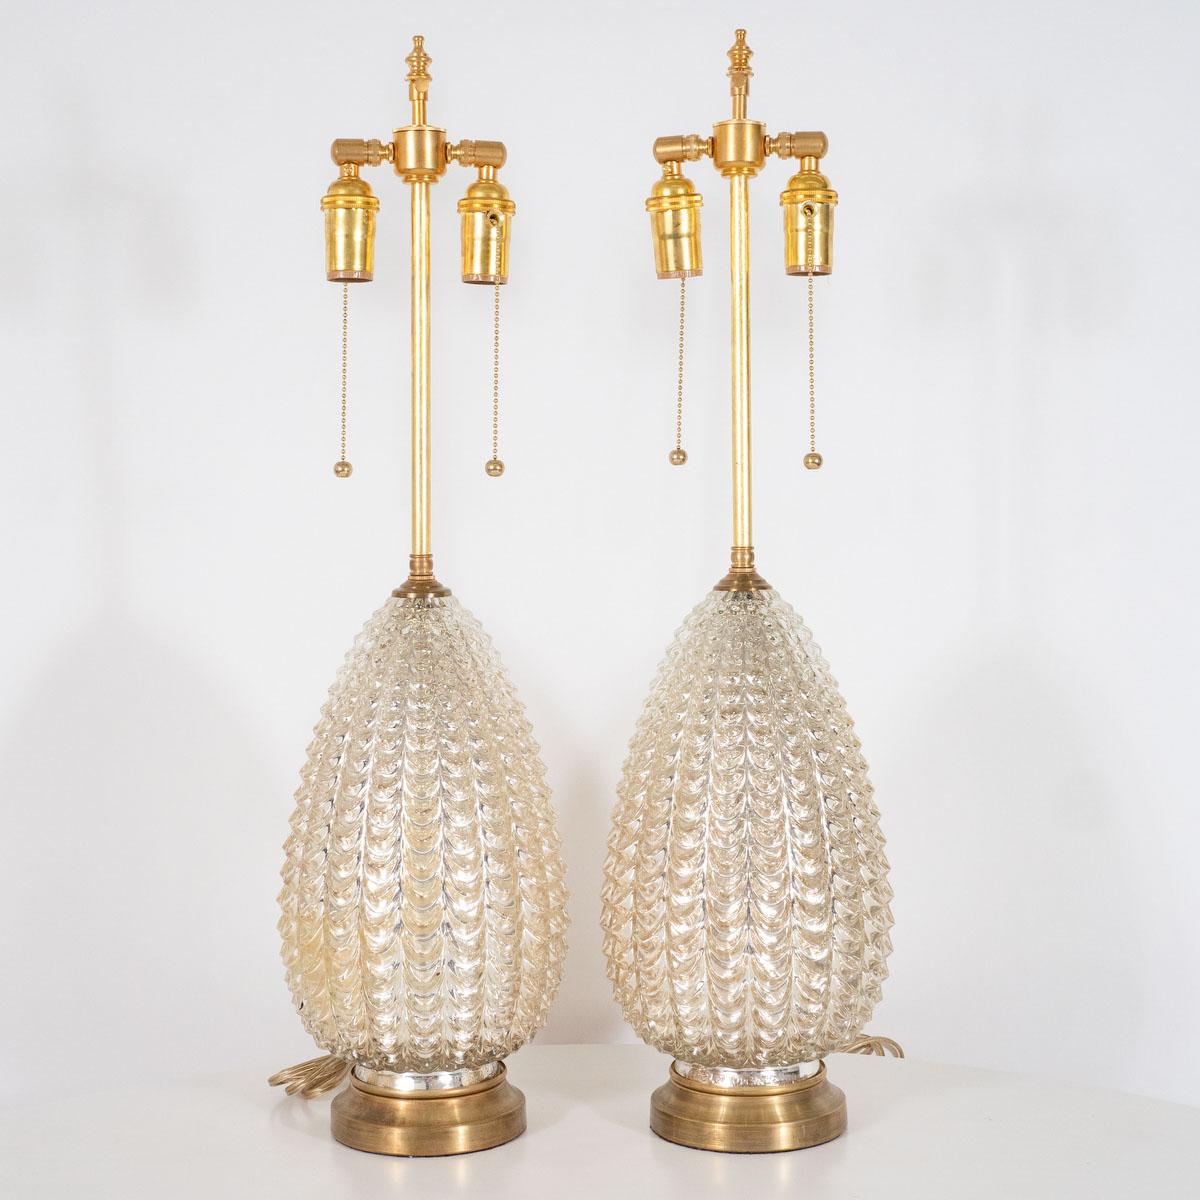 Pair of molded mercury glass table lamps with brass hardware.